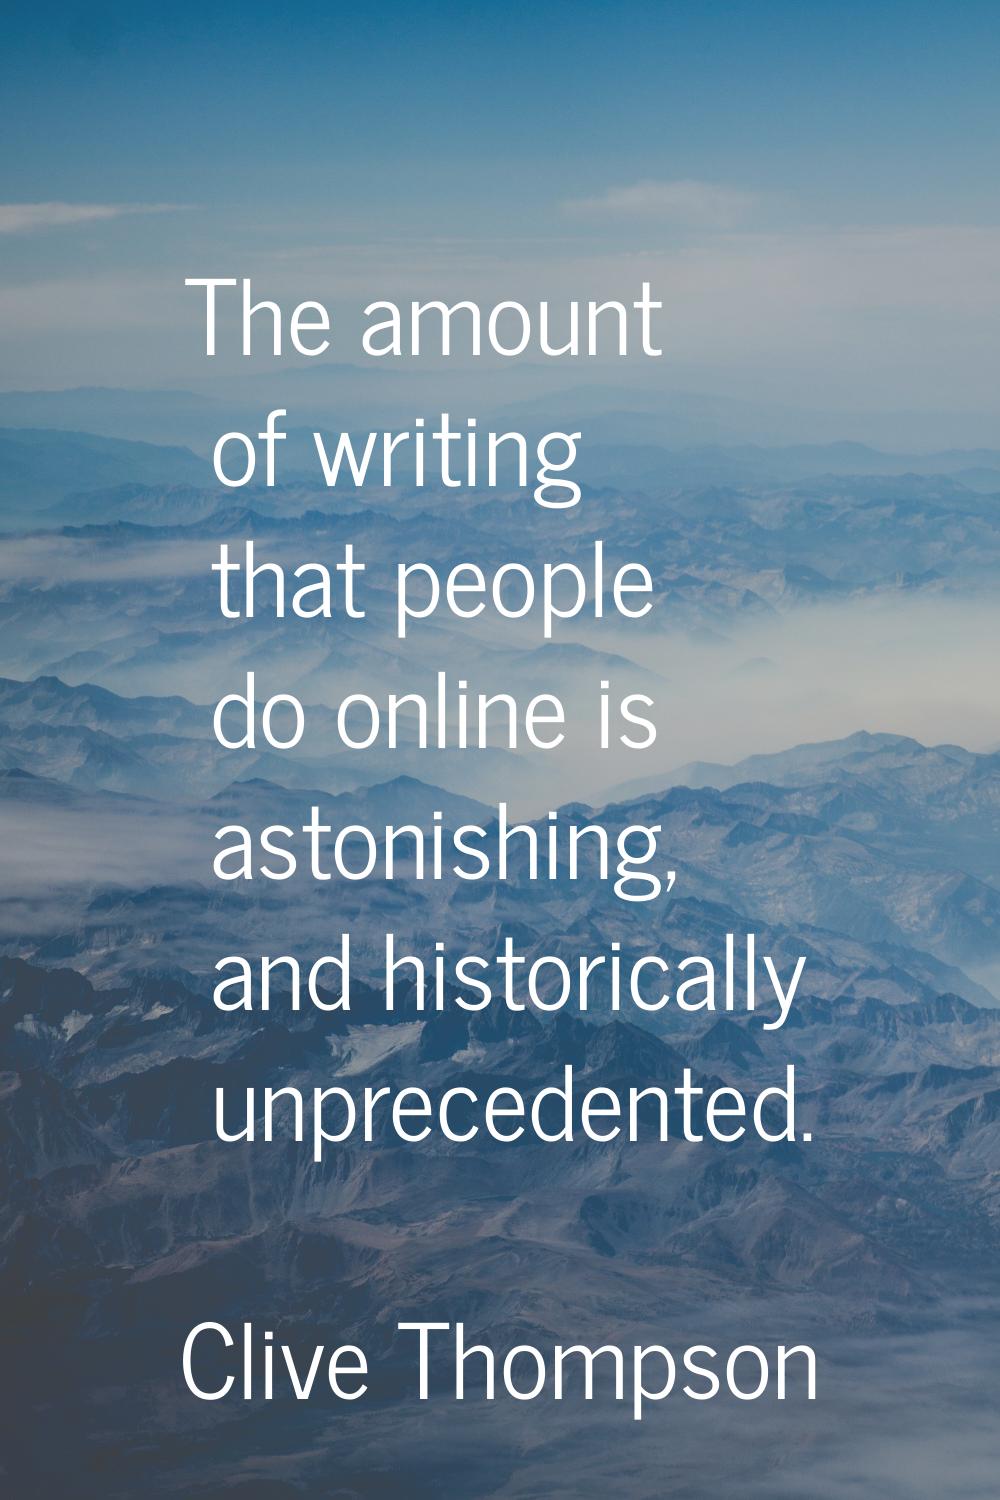 The amount of writing that people do online is astonishing, and historically unprecedented.